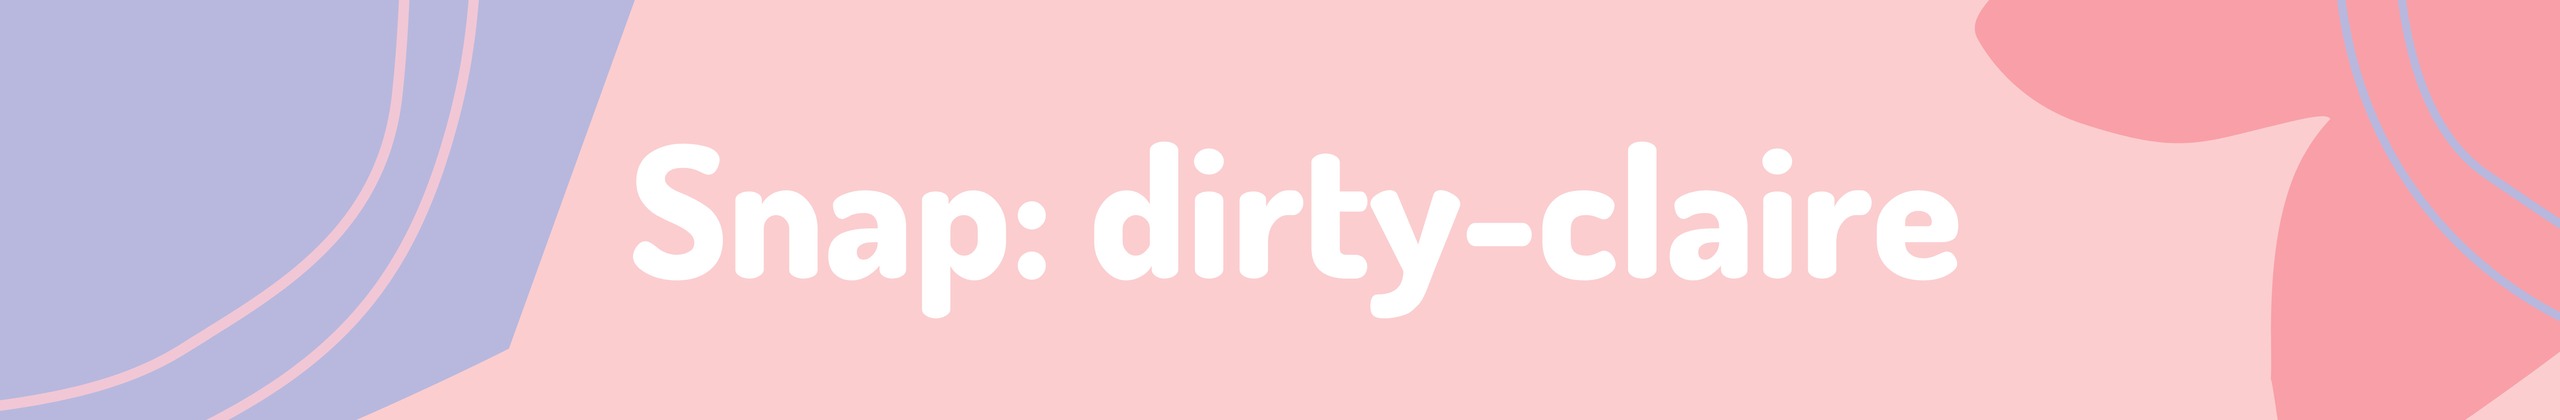 Dirty_Claire - profile image